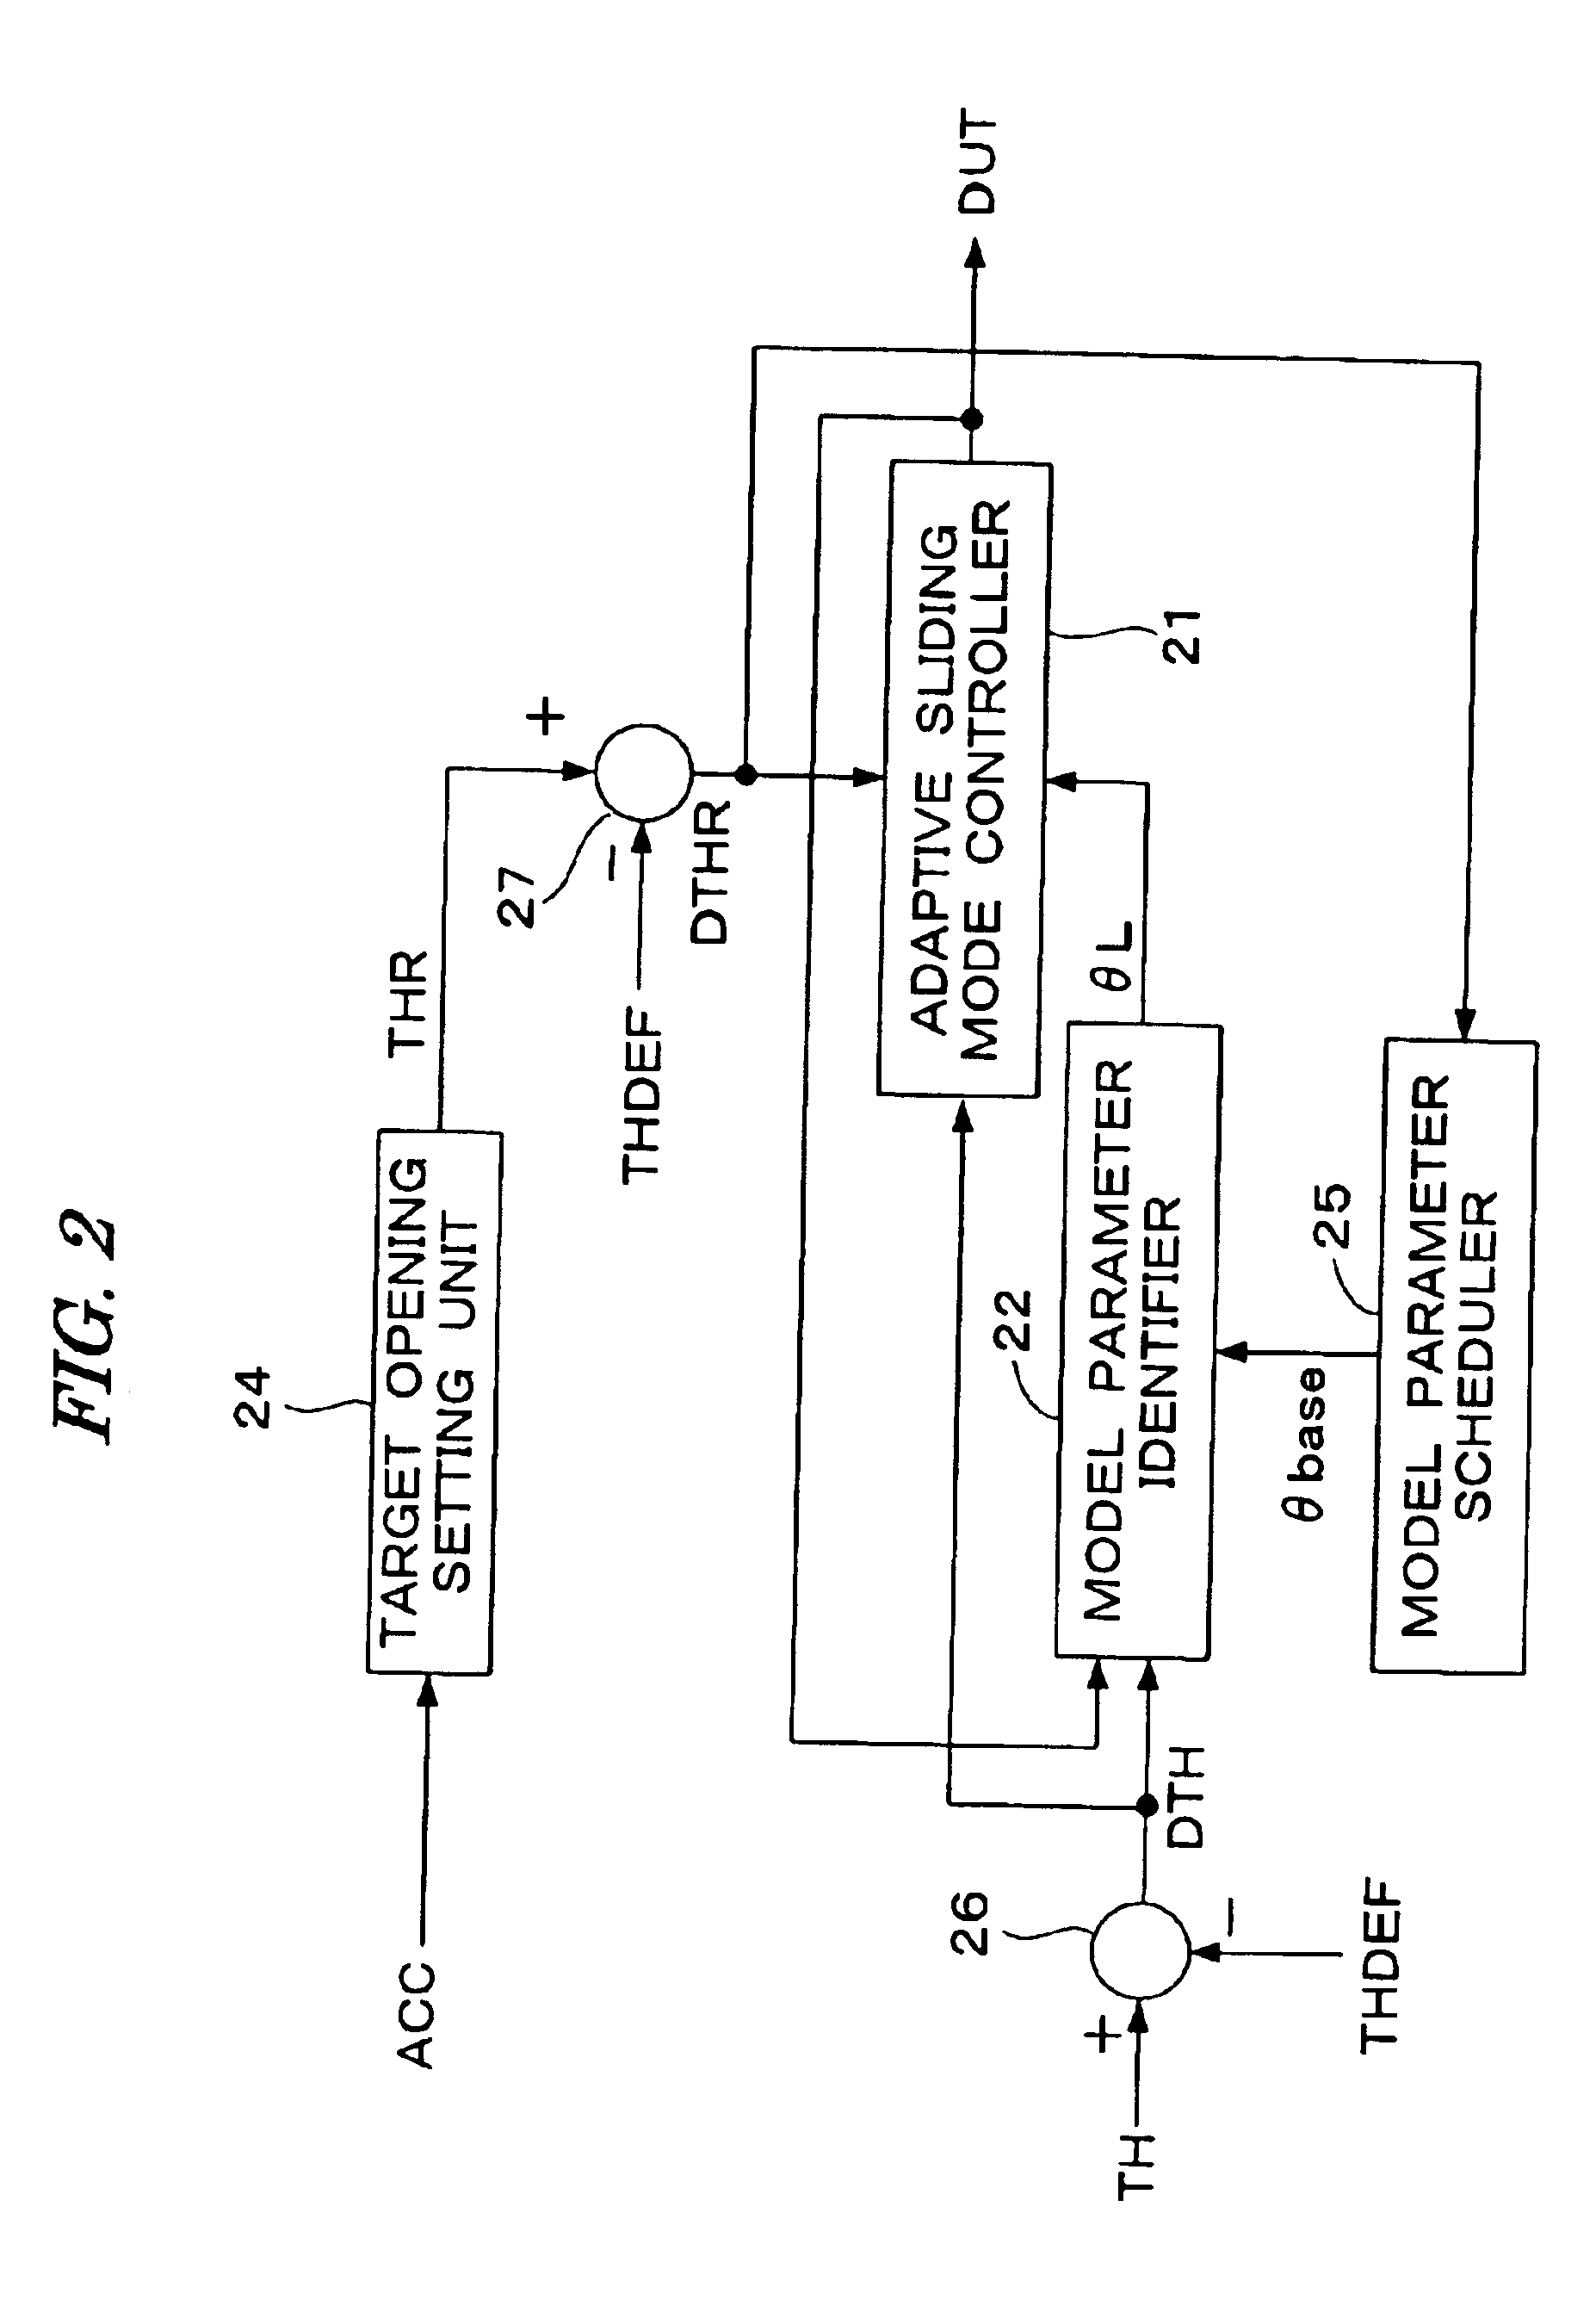 Control system for throttle valve actuating device